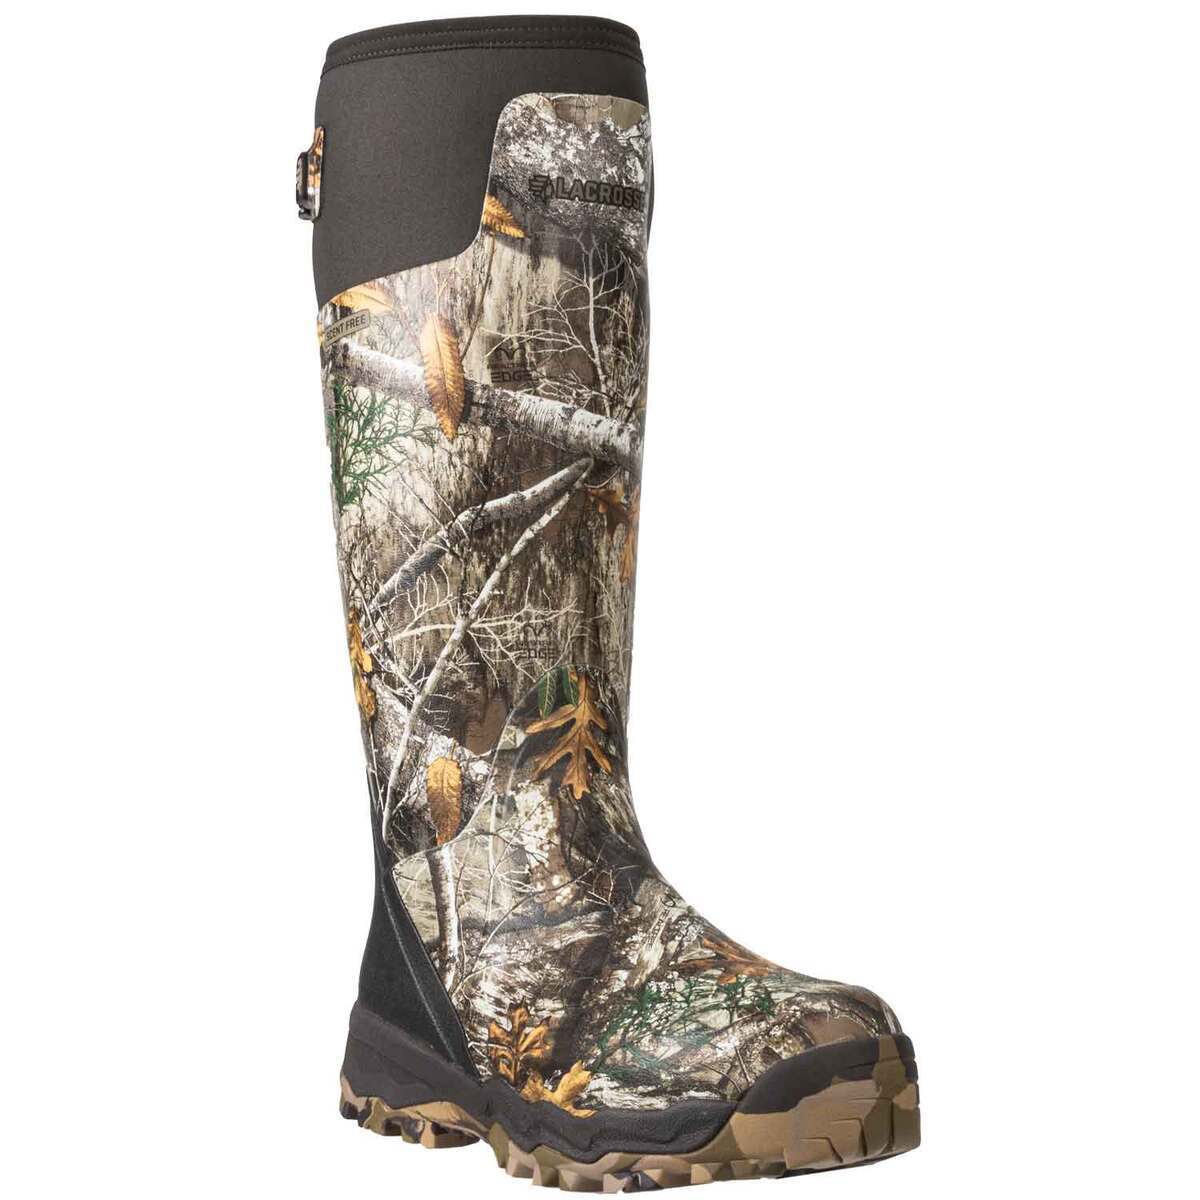 Men's Boots Rubber Insulated Waterproof Boots for Hunting Fishing Tall Boots